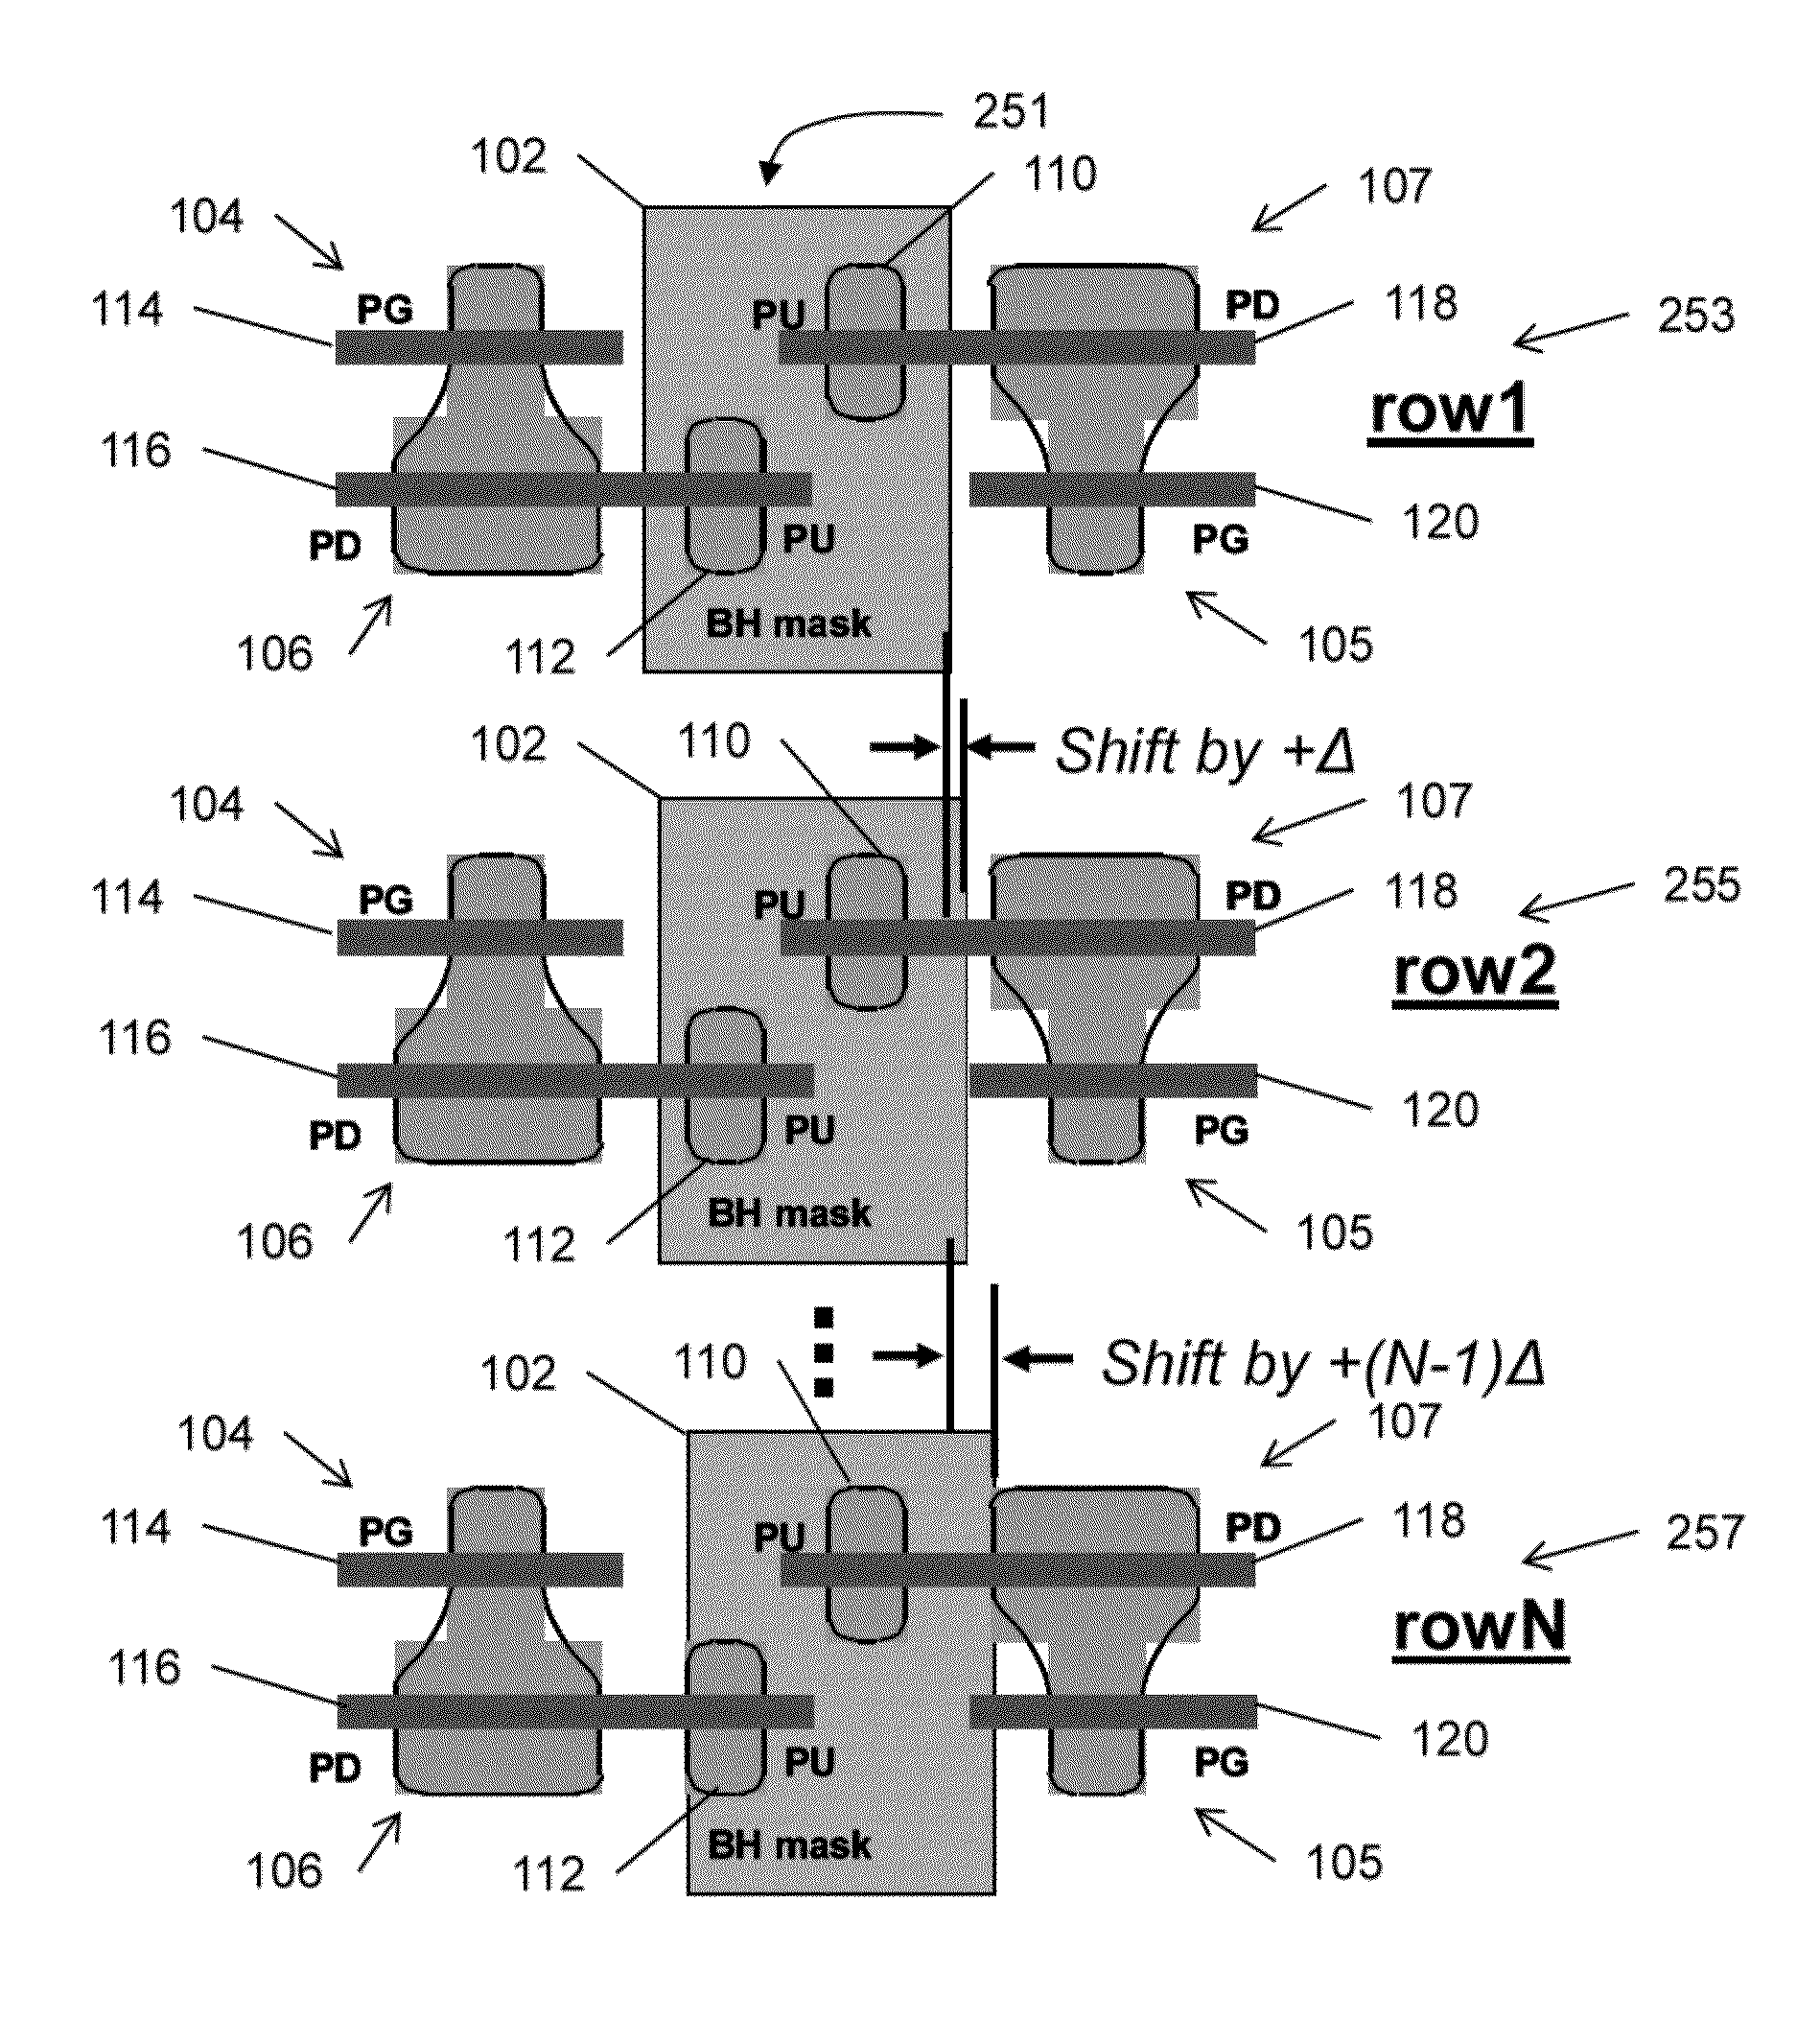 Circuit technique to electrically characterize block mask shifts